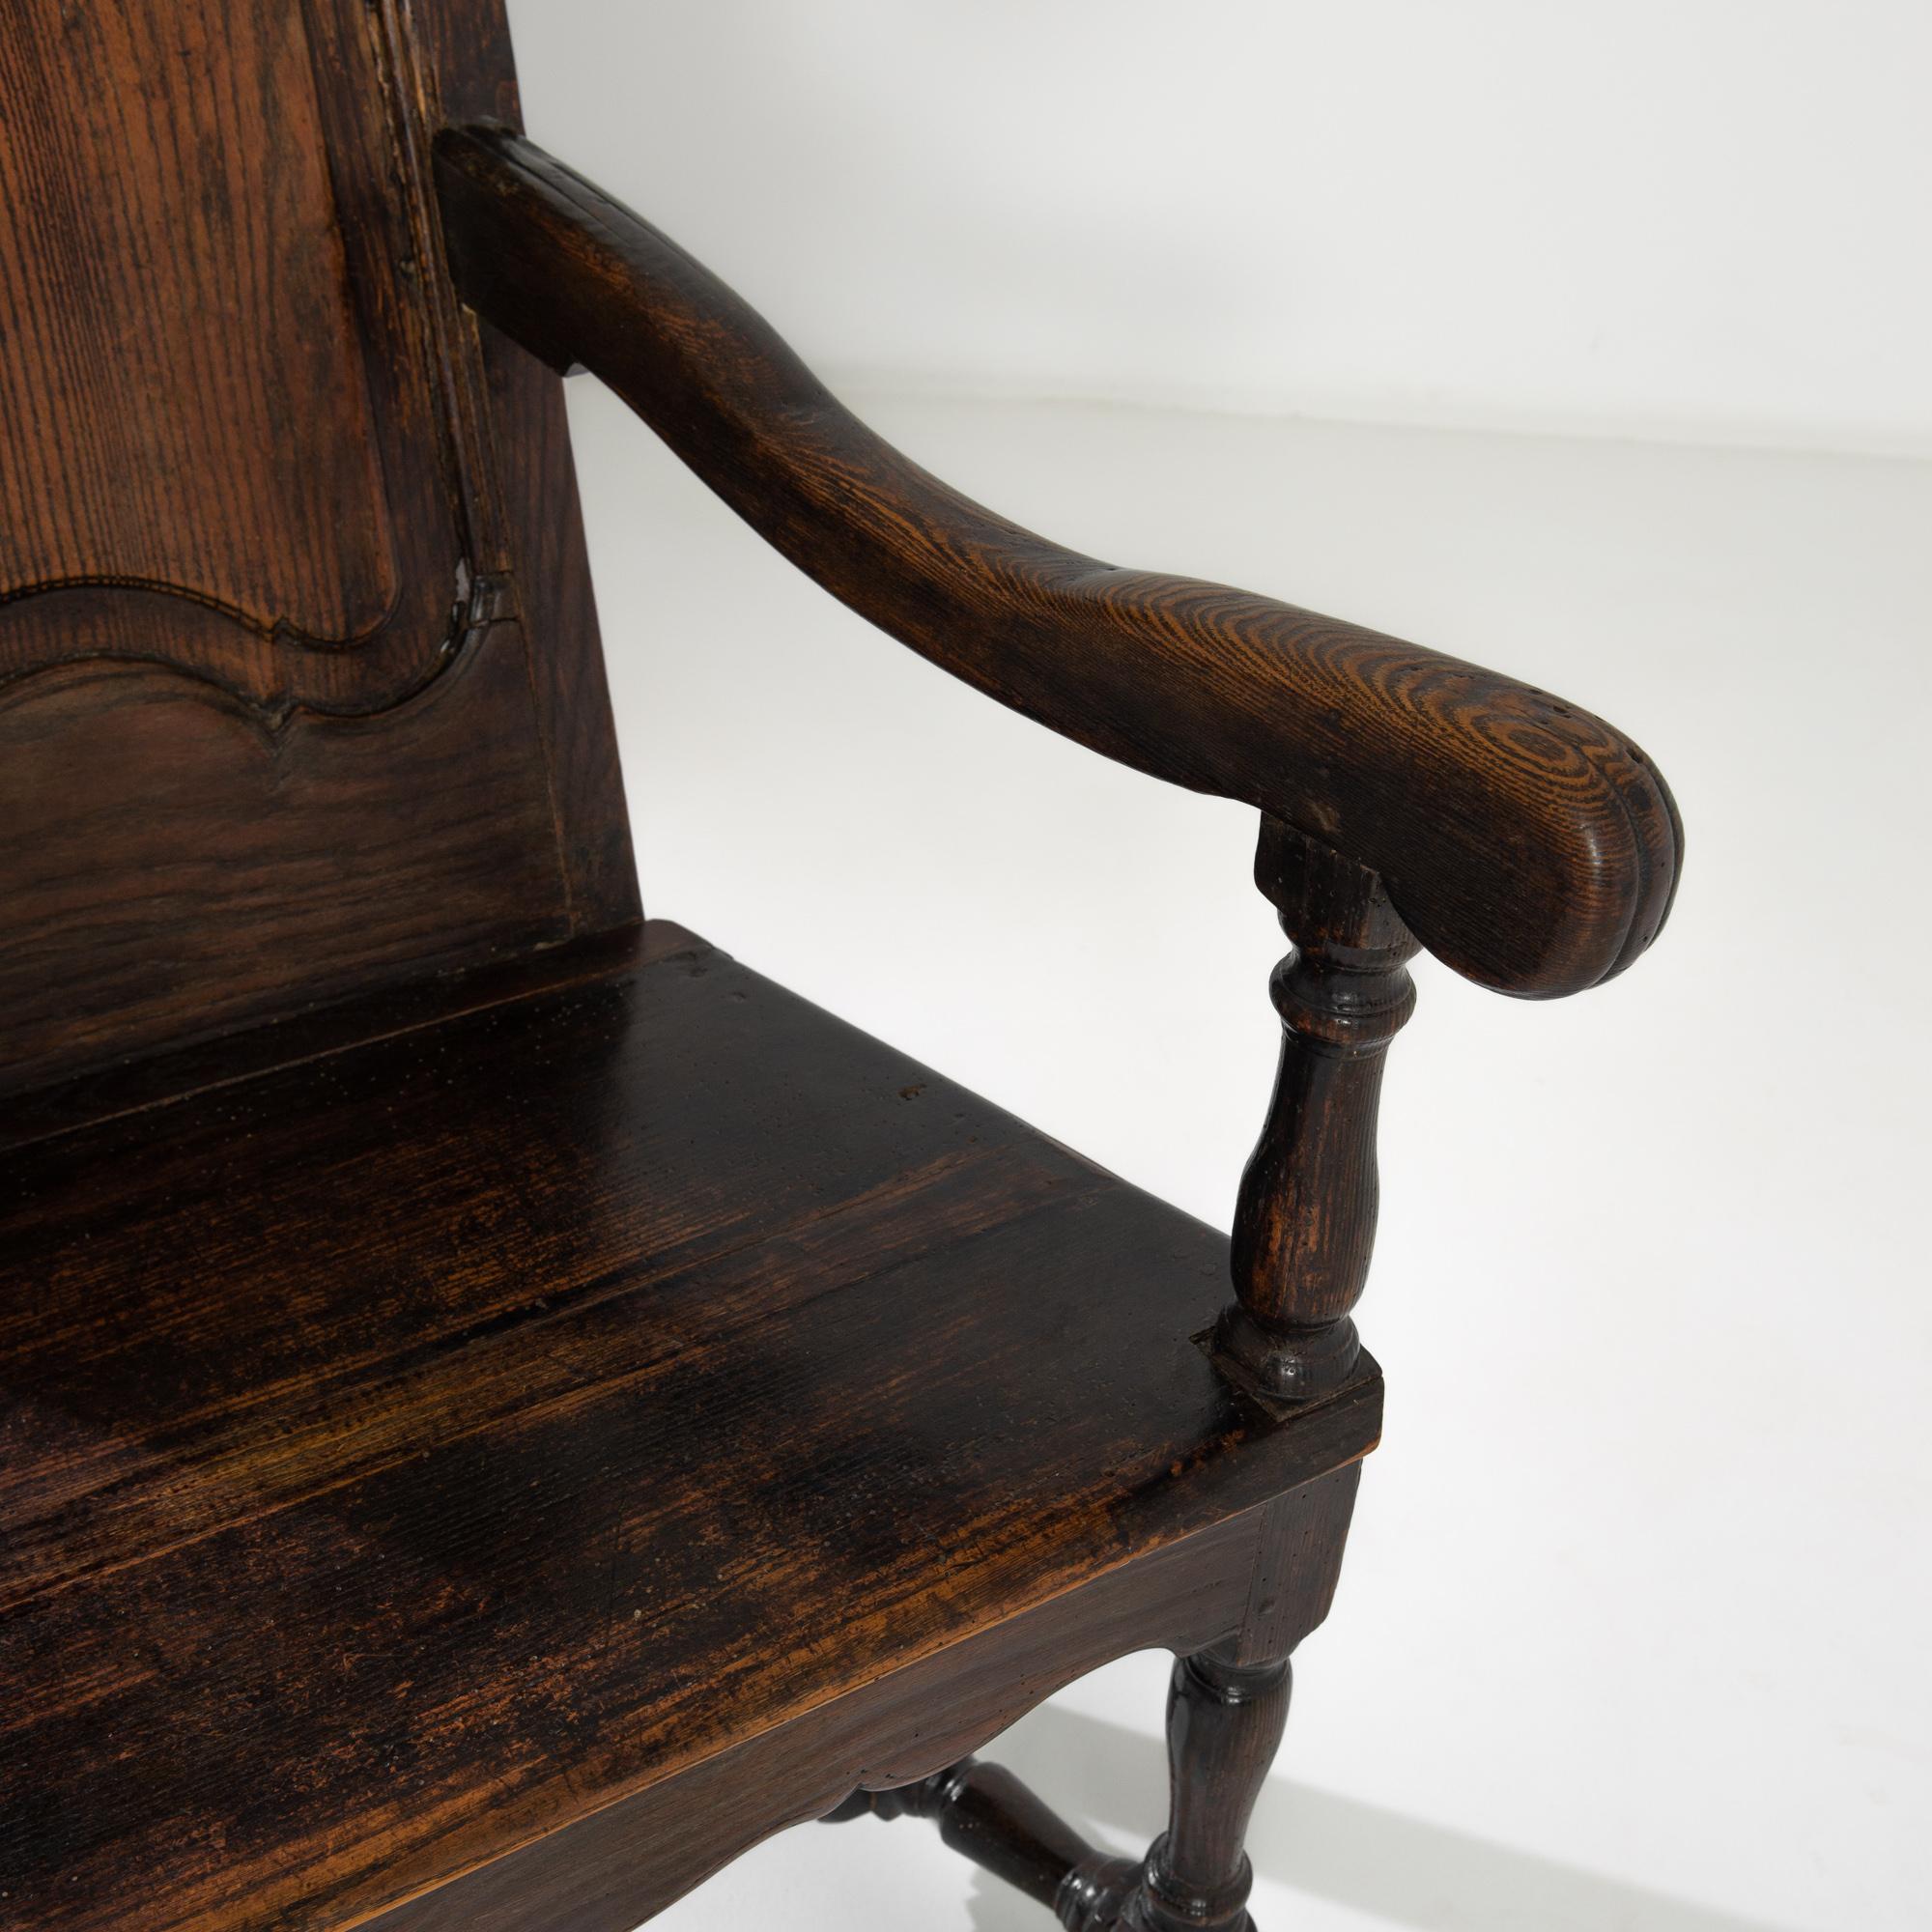 A wooden armchair with original patina from the United Kingdom, produced circa 1800. A regal armchair constructed with a gorgeous dark oak, featuring a gently angled back, a capital “I” shaped stretcher, and an apron under the seat. The strict lines